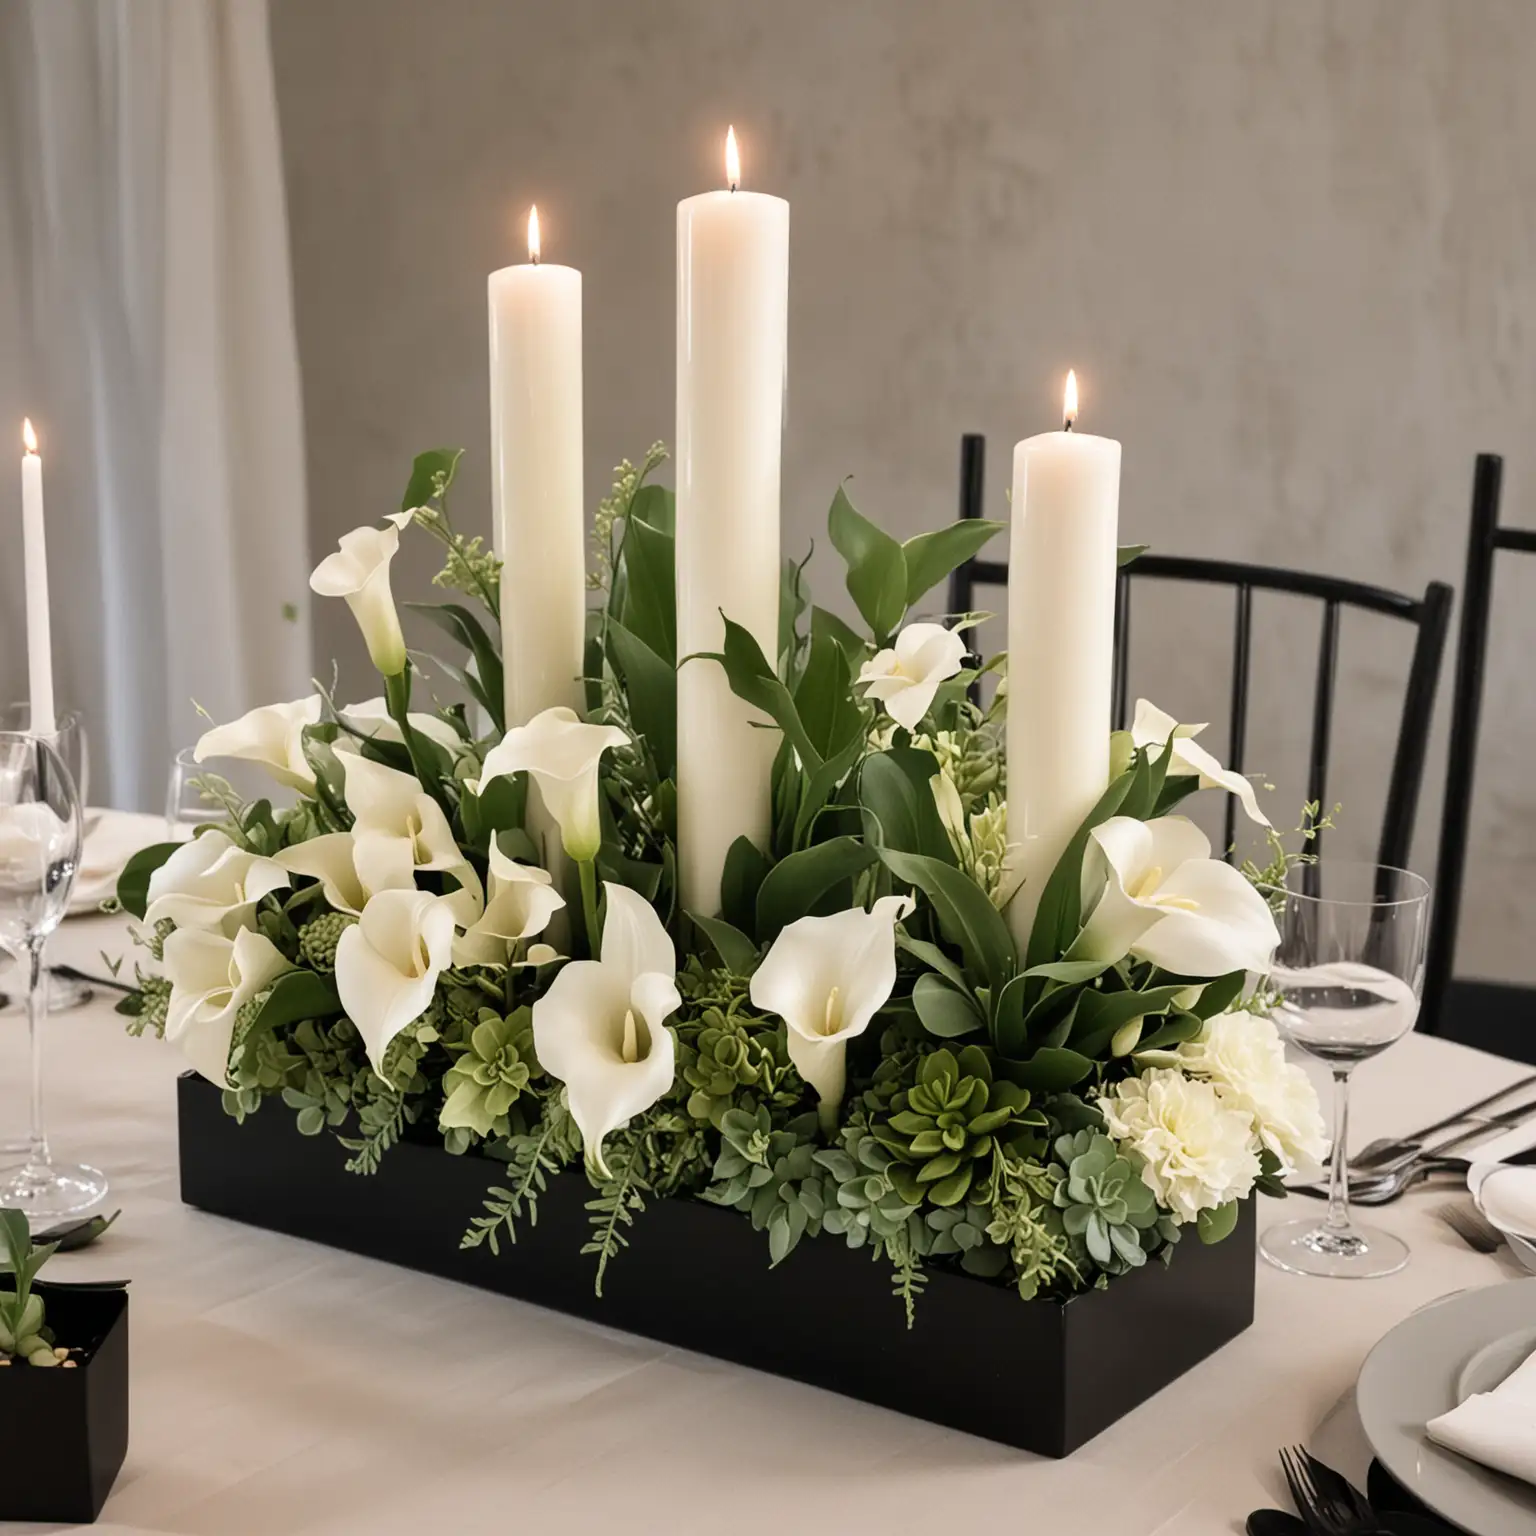 Modern-Wedding-Centerpiece-Elegant-Black-Metal-Vase-with-White-Calla-Lilies-and-Succulents